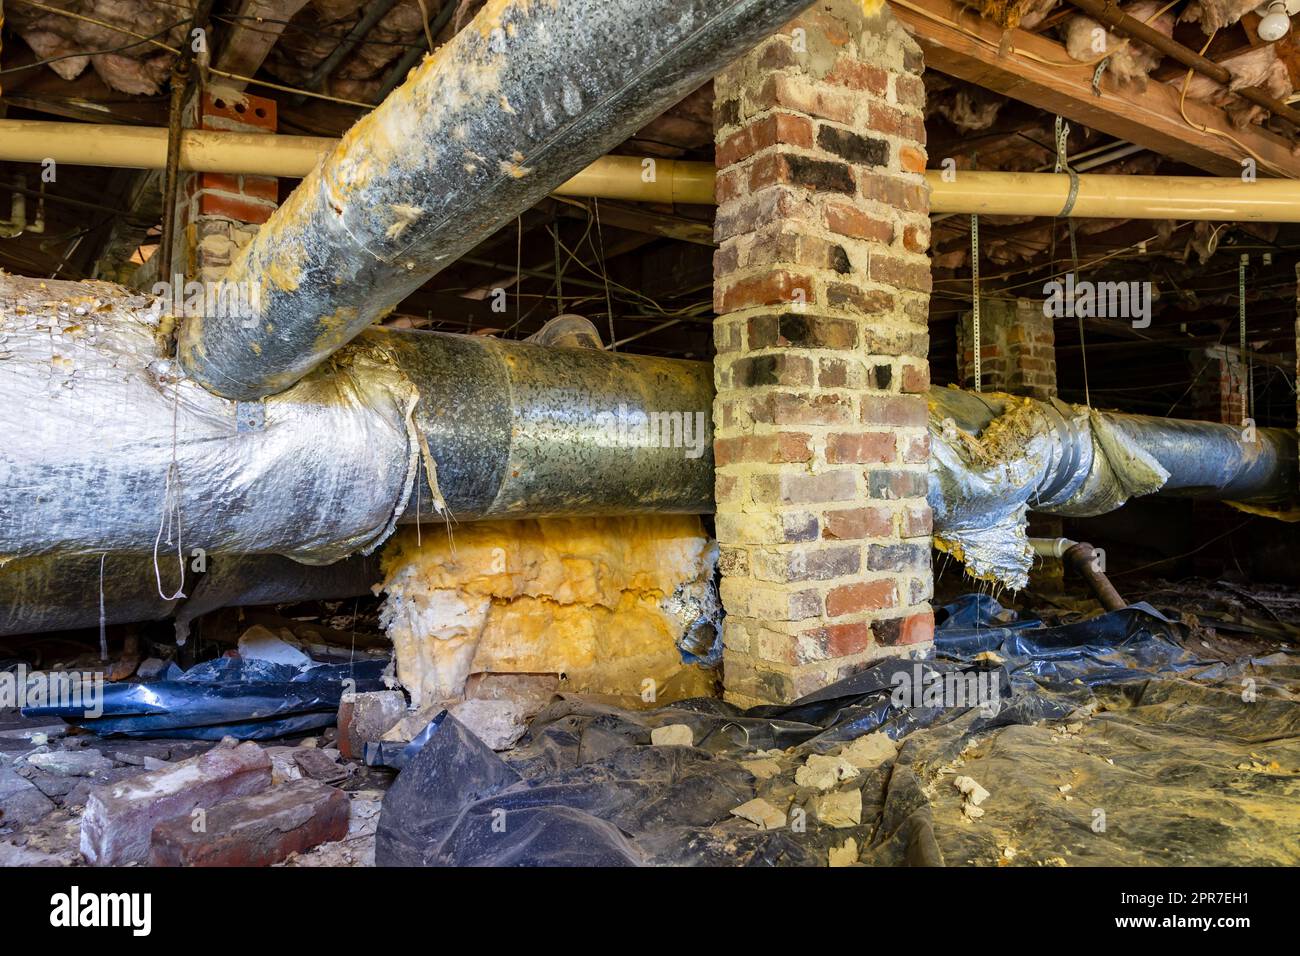 Air Conditioner supply duct work in need of repair and replacement. Stock Photo